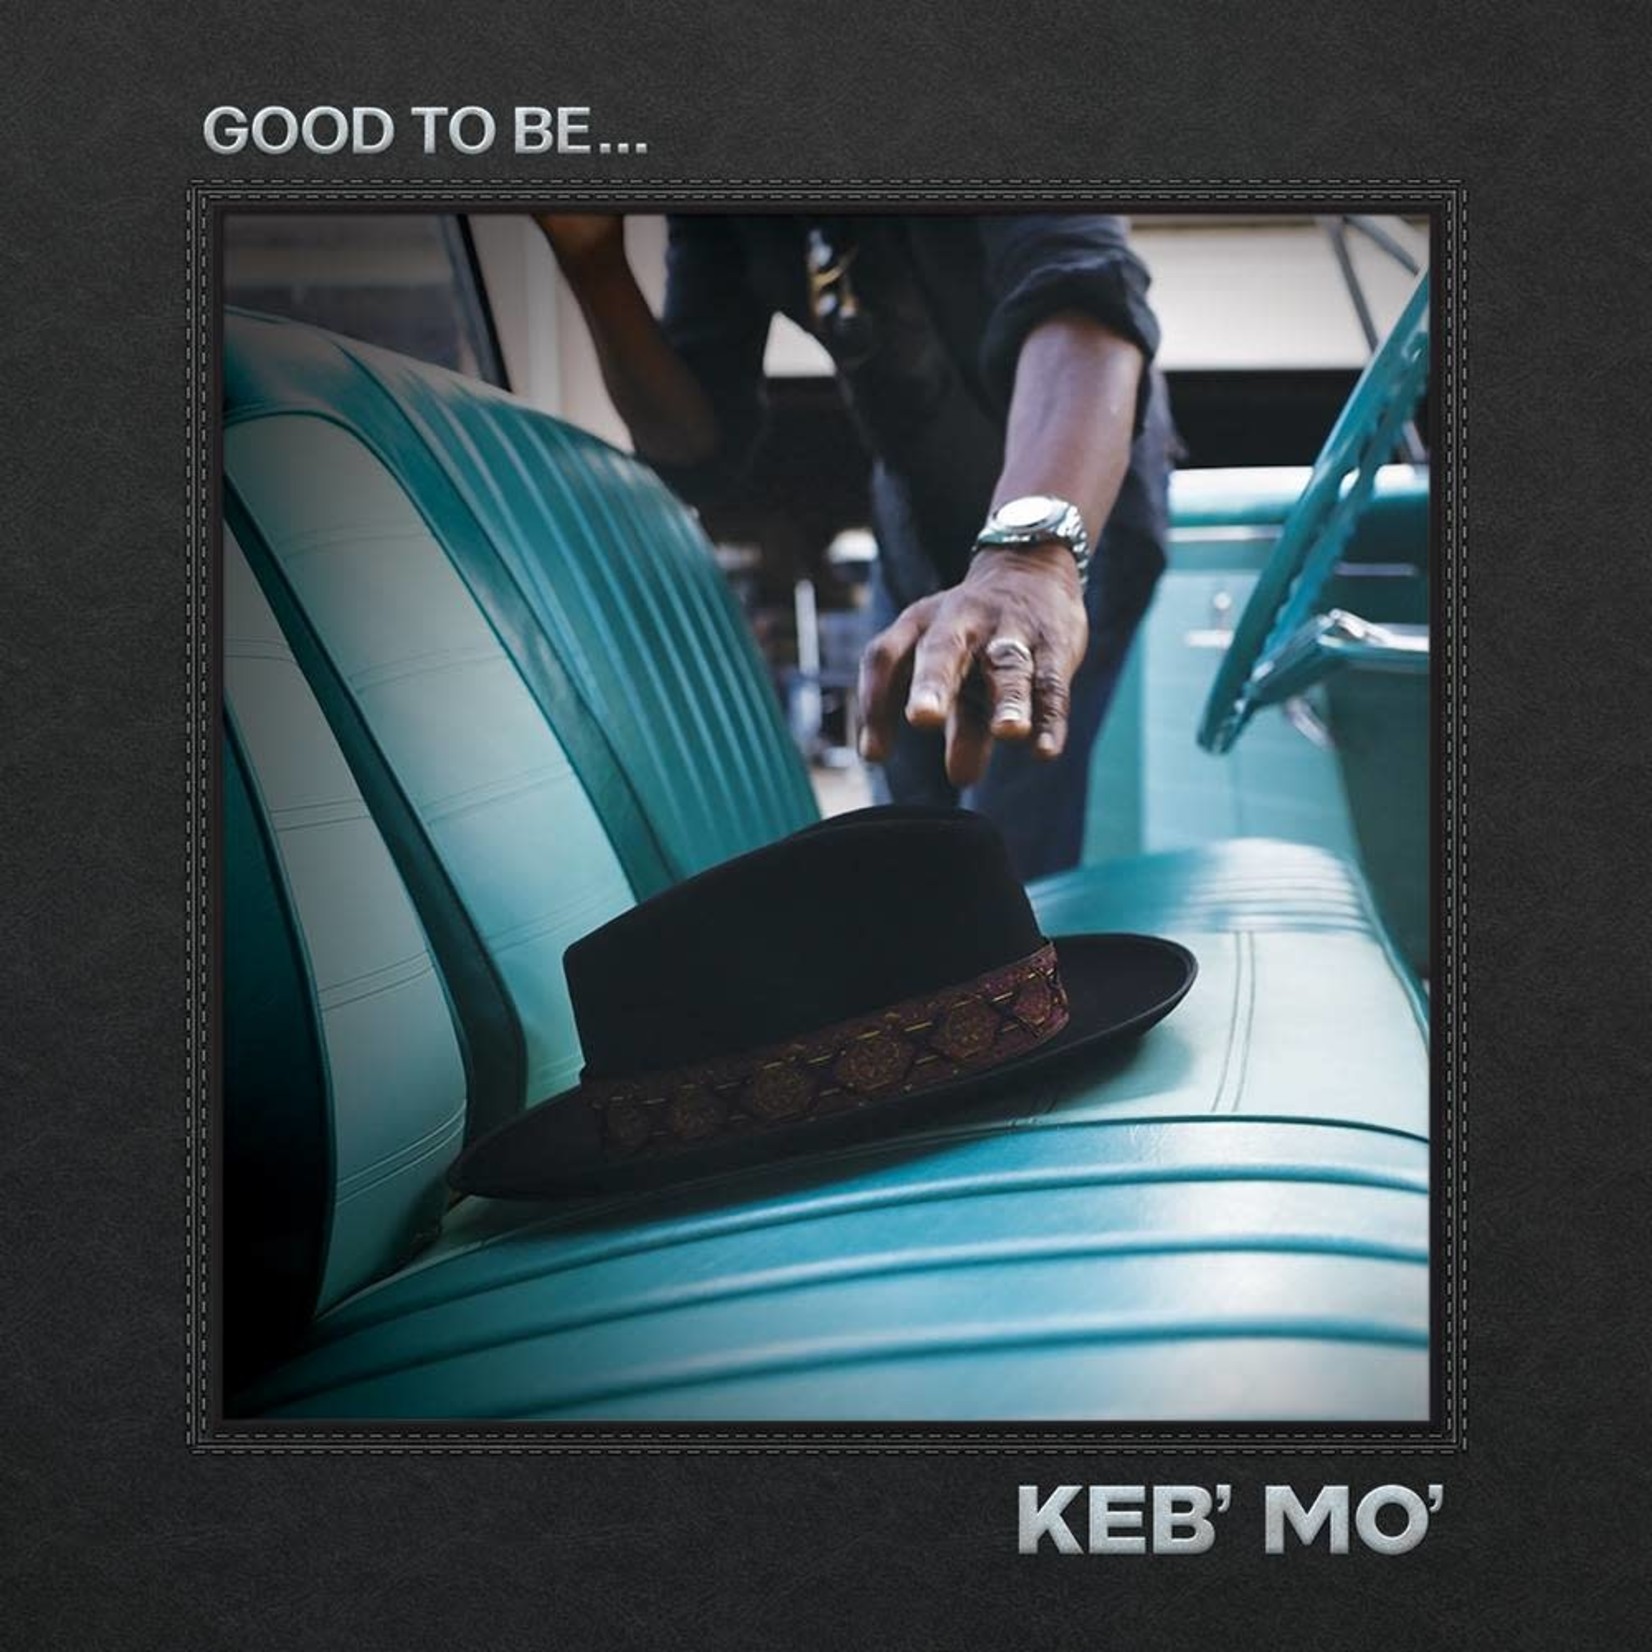 [New] Keb' Mo' - Good To Be (2LP, translucent red/indie exclusive vinyl)